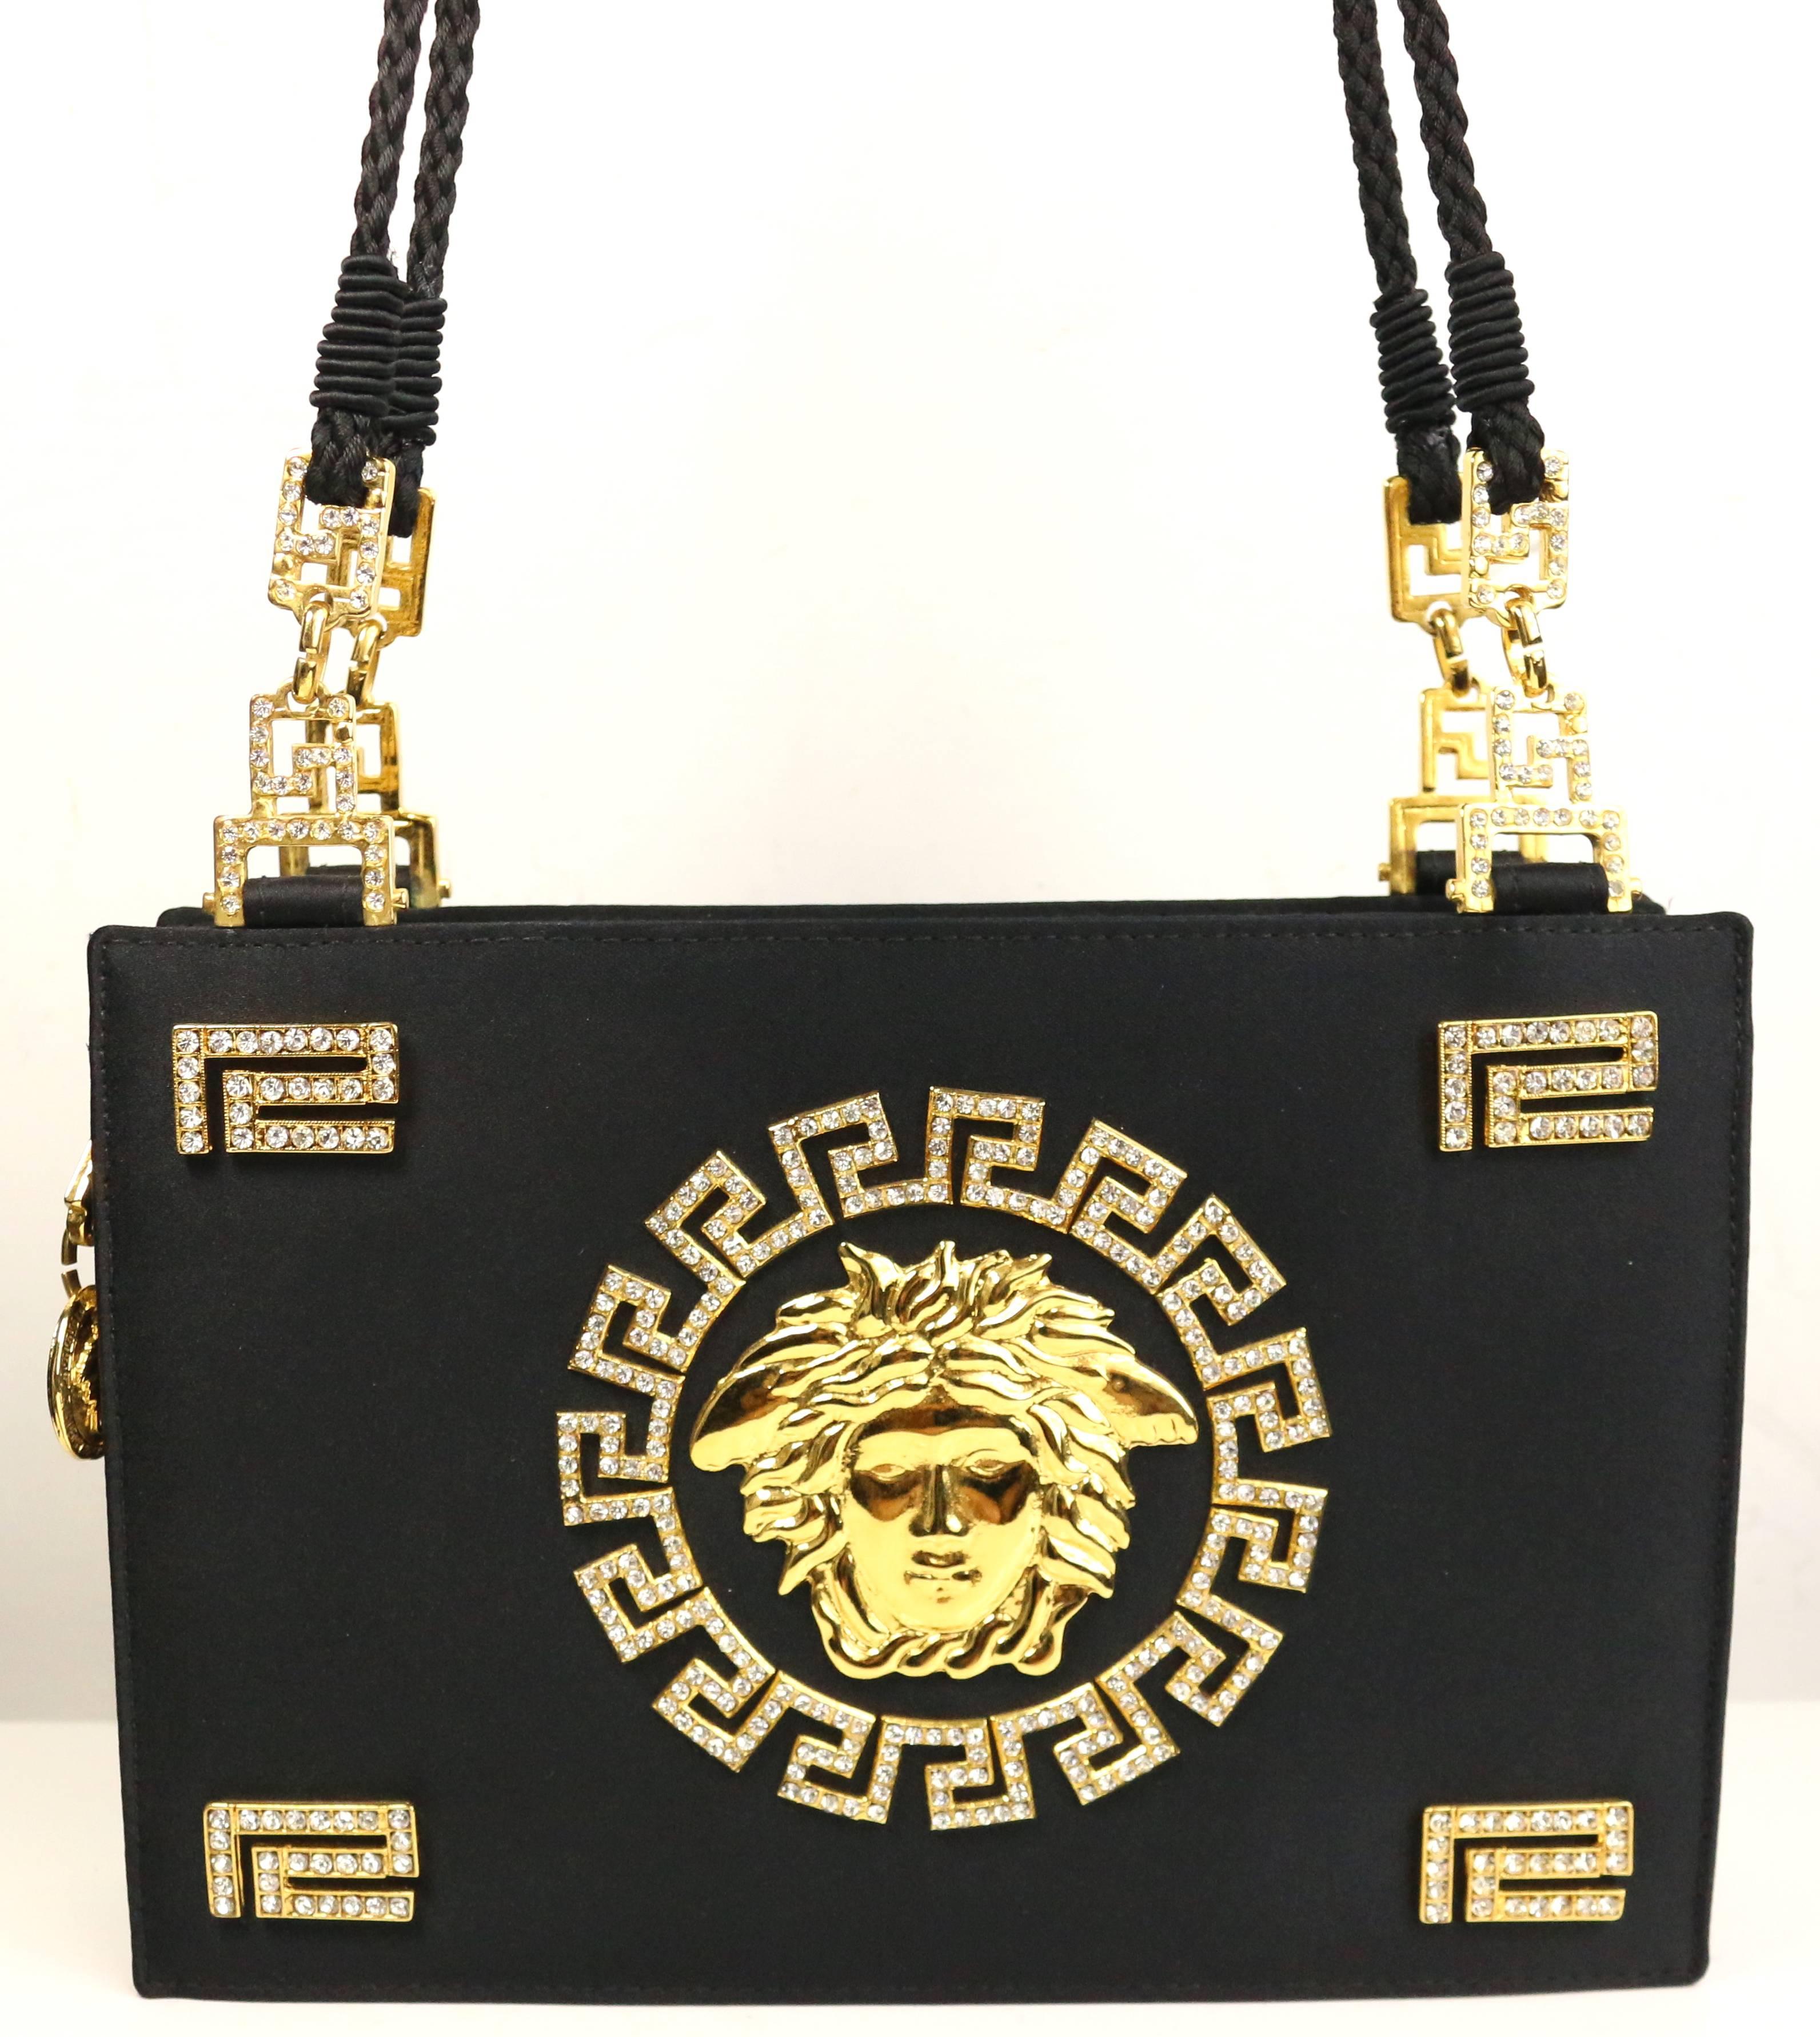 - Embedded iconic gold and rhinestones Medusa logo. 

- Made in Italy. 

- Length: 9 inches. Height: 6 inches. Width: 2 inches. Shoulder Drop: 21 inches. 
